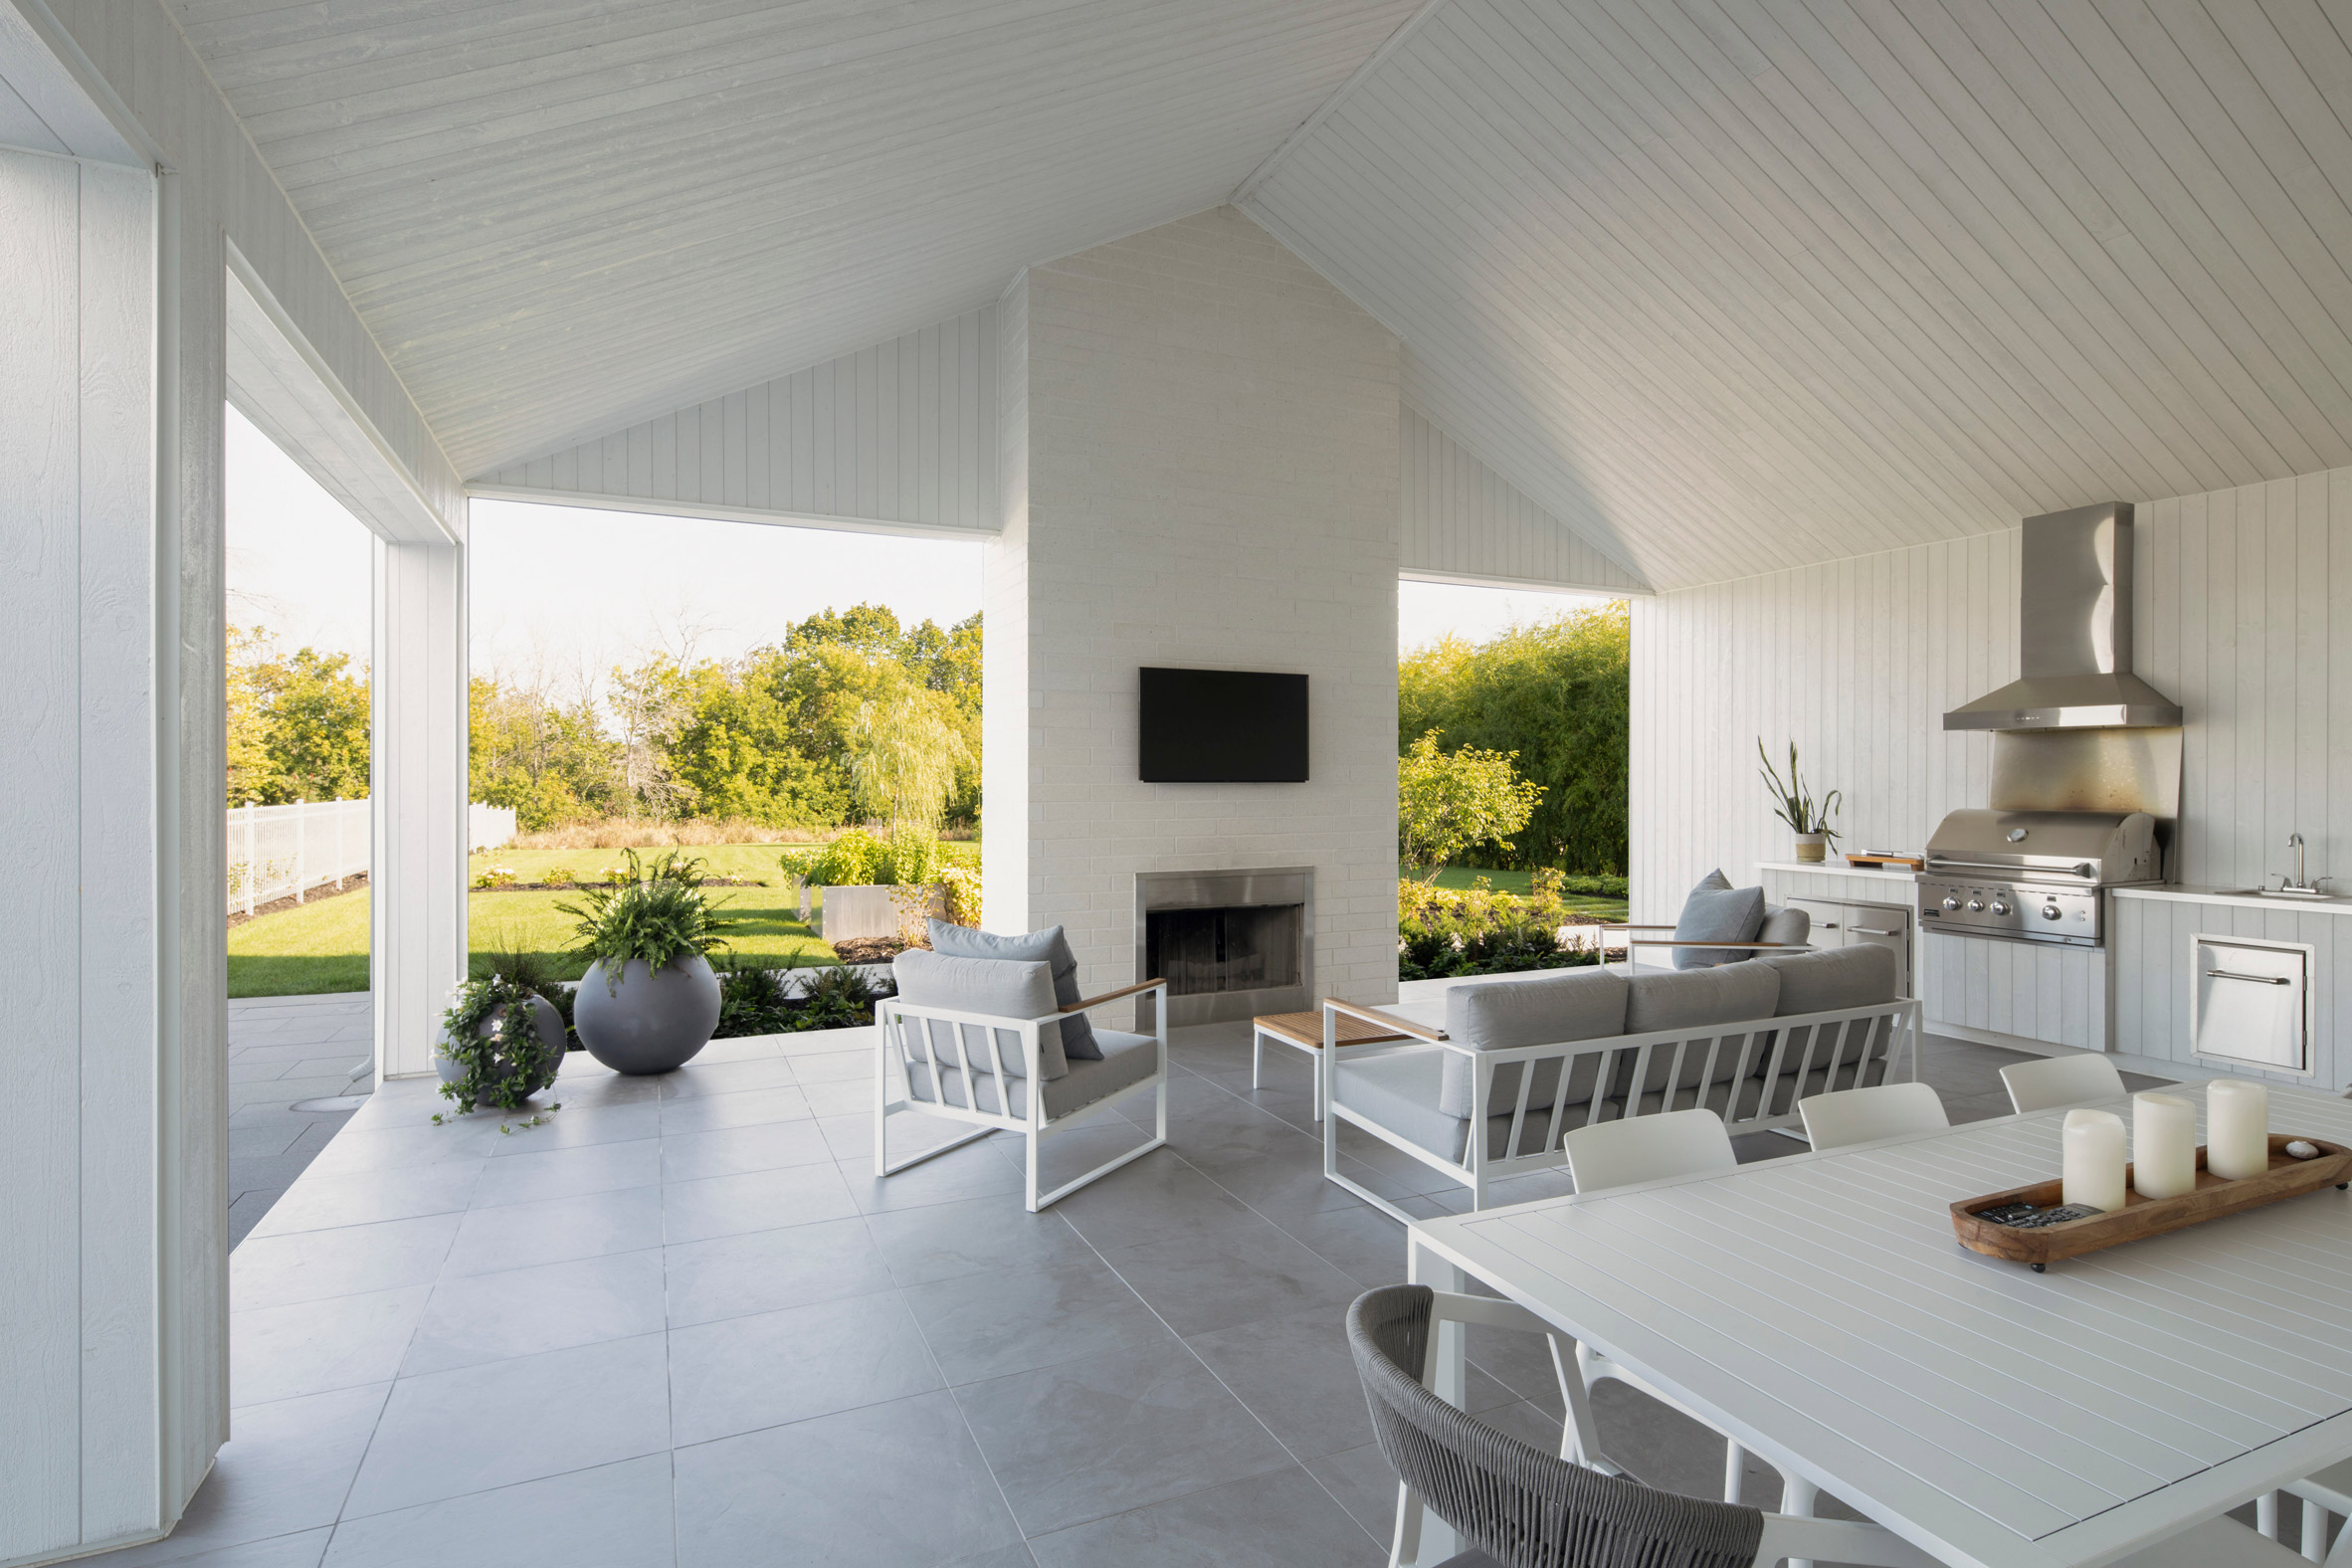 An open-plan living and dining space on a terrace with grey floors and white ceiling overhead